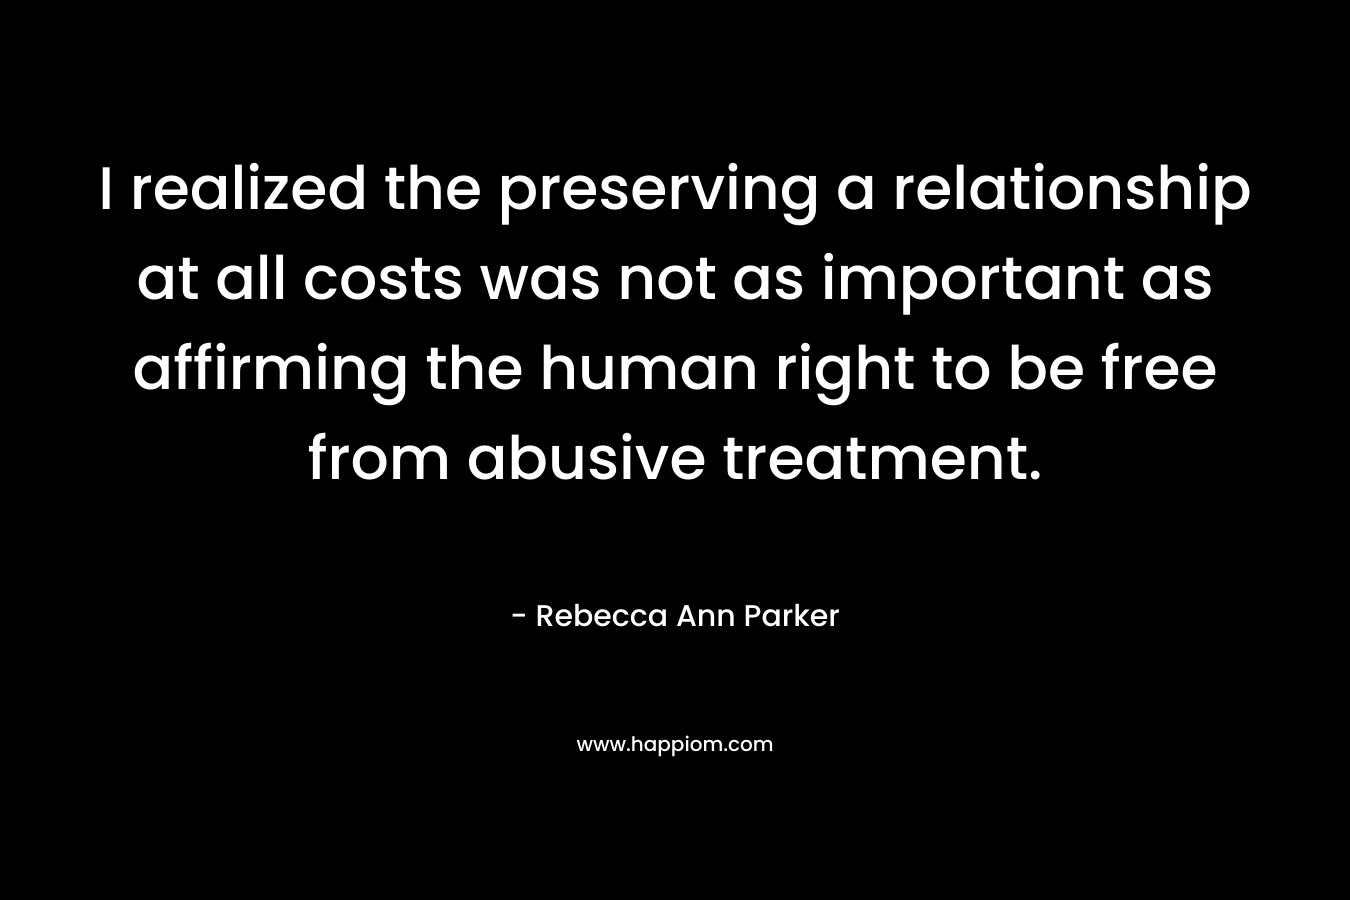 I realized the preserving a relationship at all costs was not as important as affirming the human right to be free from abusive treatment. – Rebecca Ann Parker